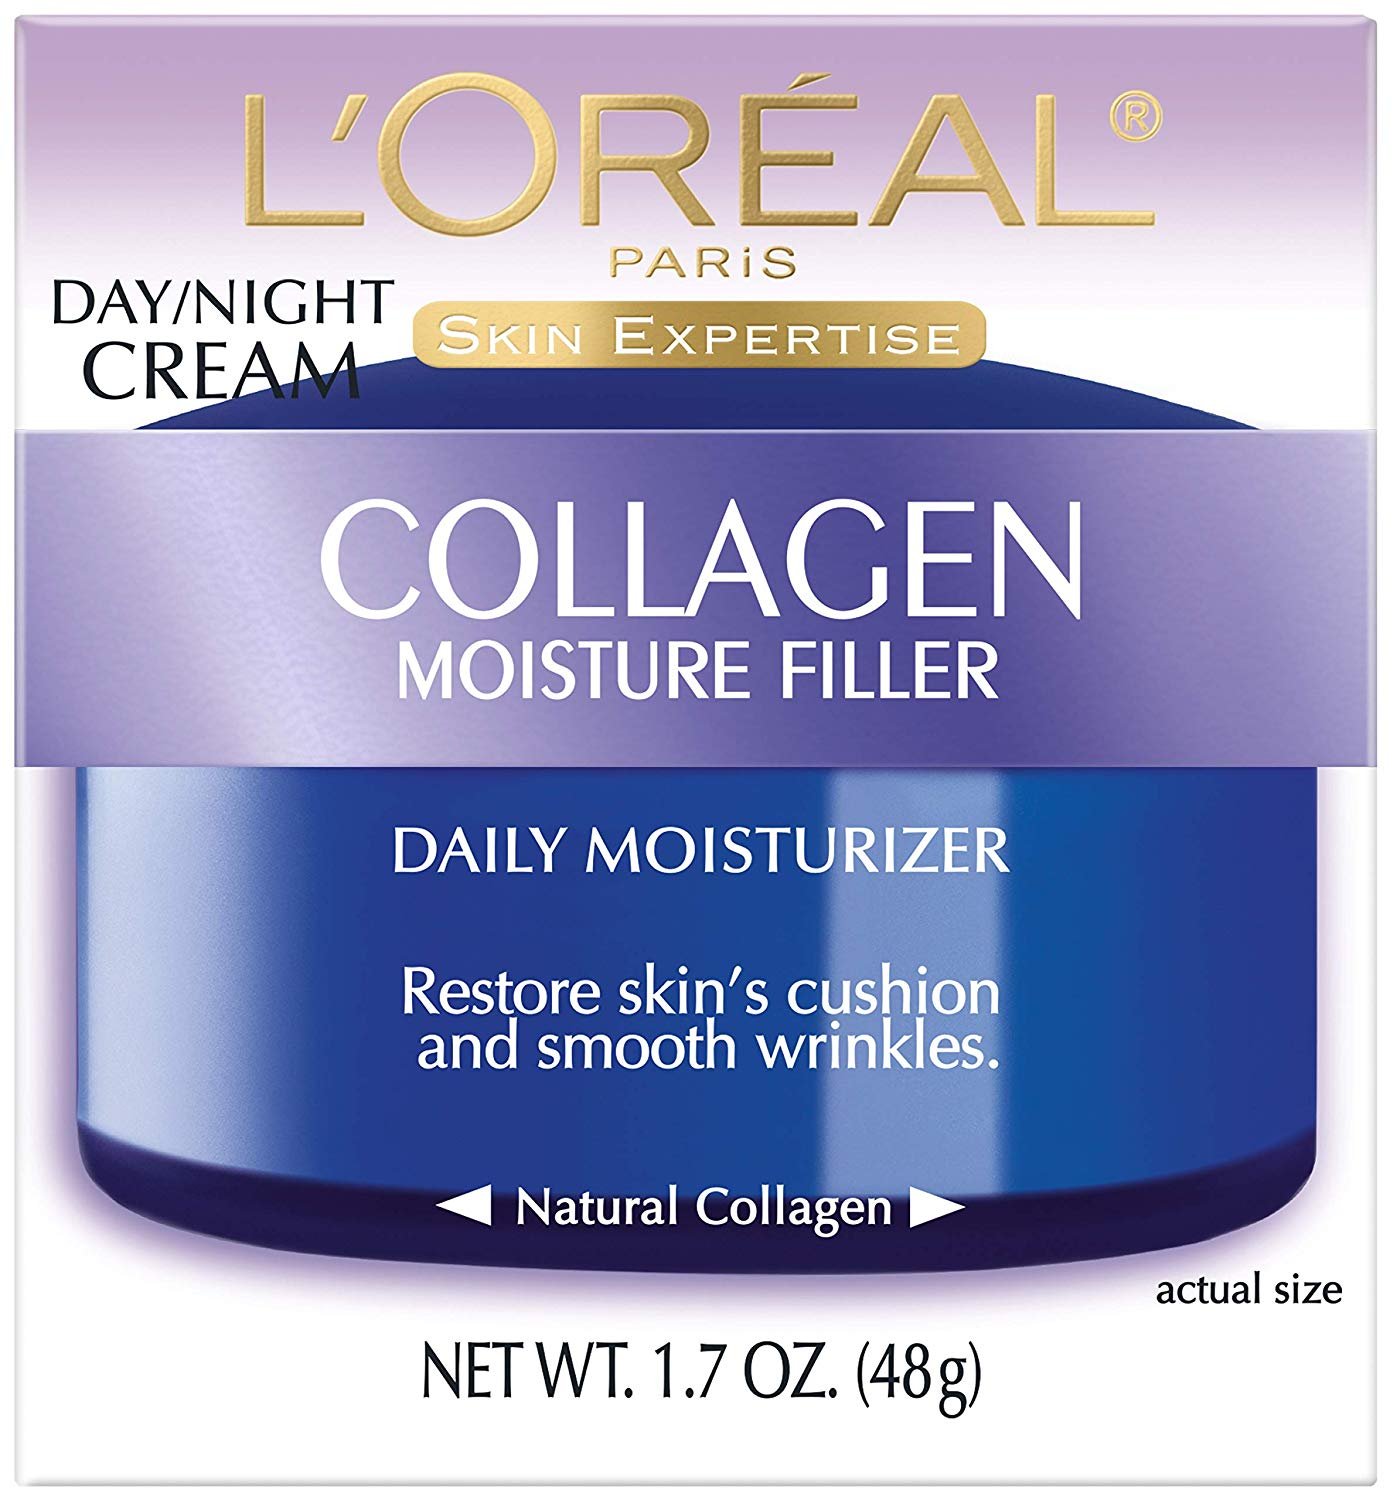 L'Oreal Paris Collagen Moisture Filler Anti Aging Day and Night Face Cream, 1.7 oz - image 2 of 10